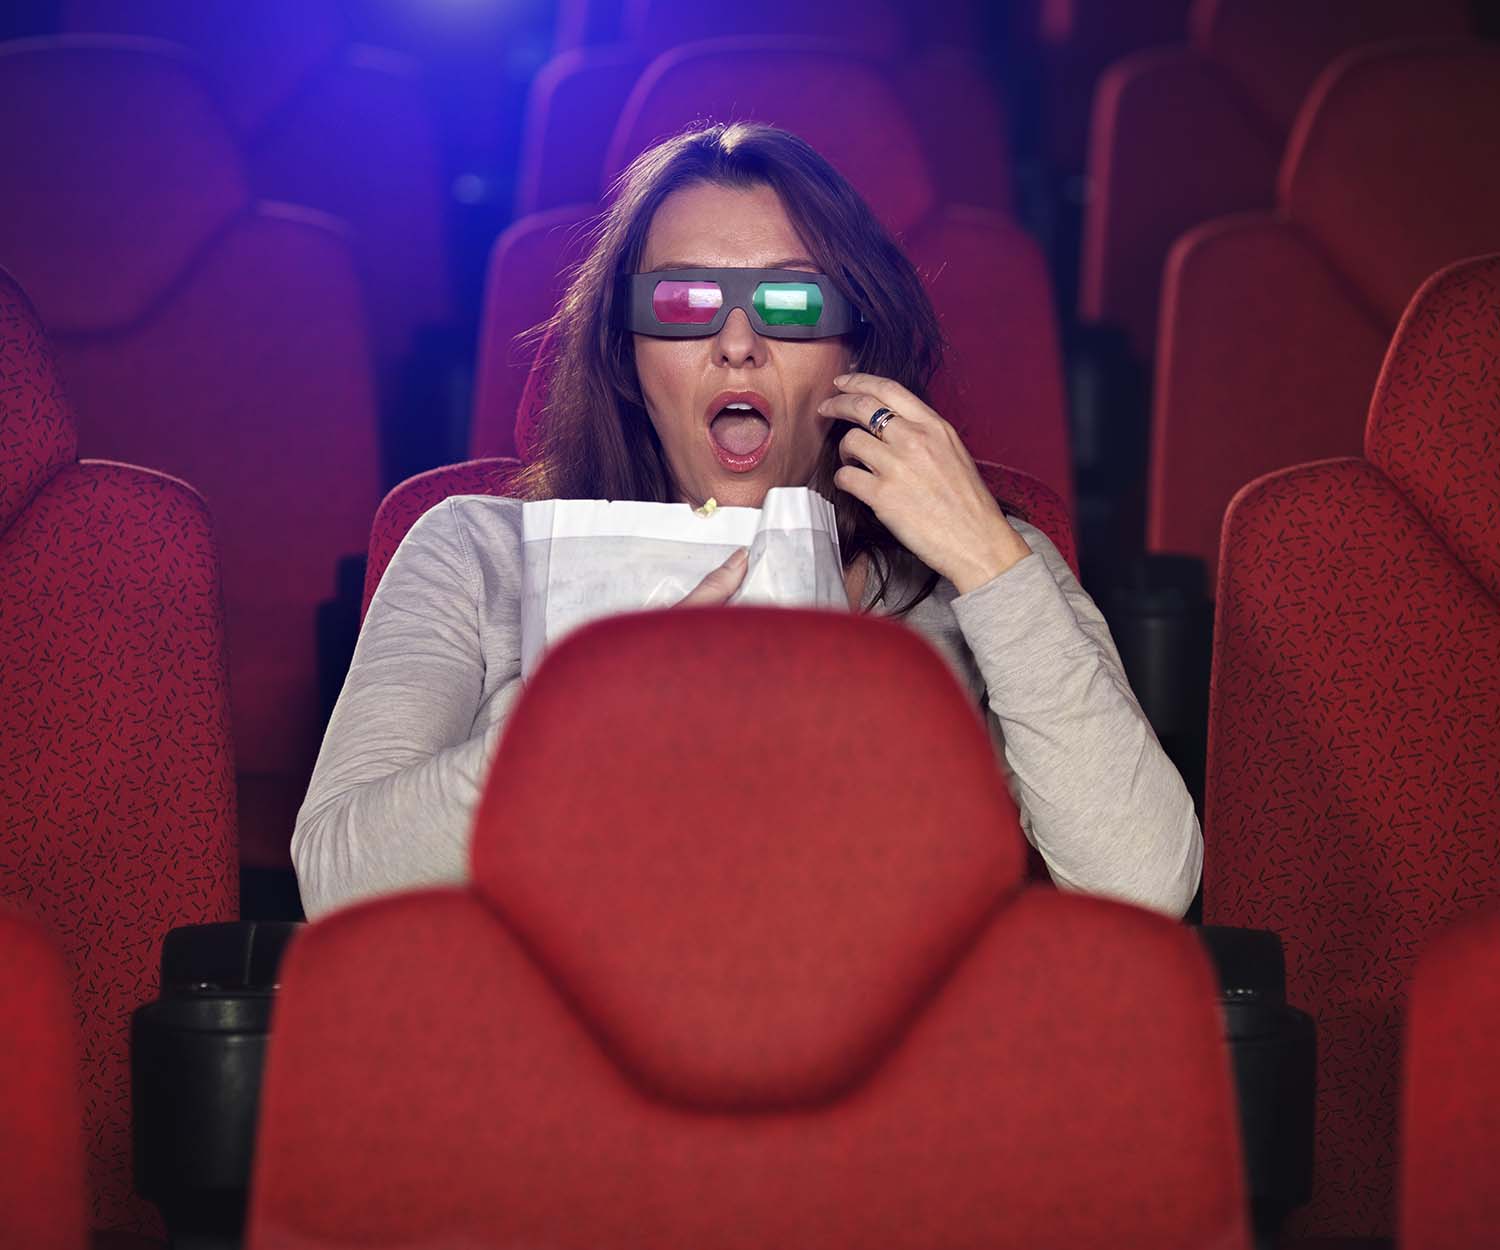 Joyous news! Sub title technology for the hearing impaired is being trialled at NZ cinemas